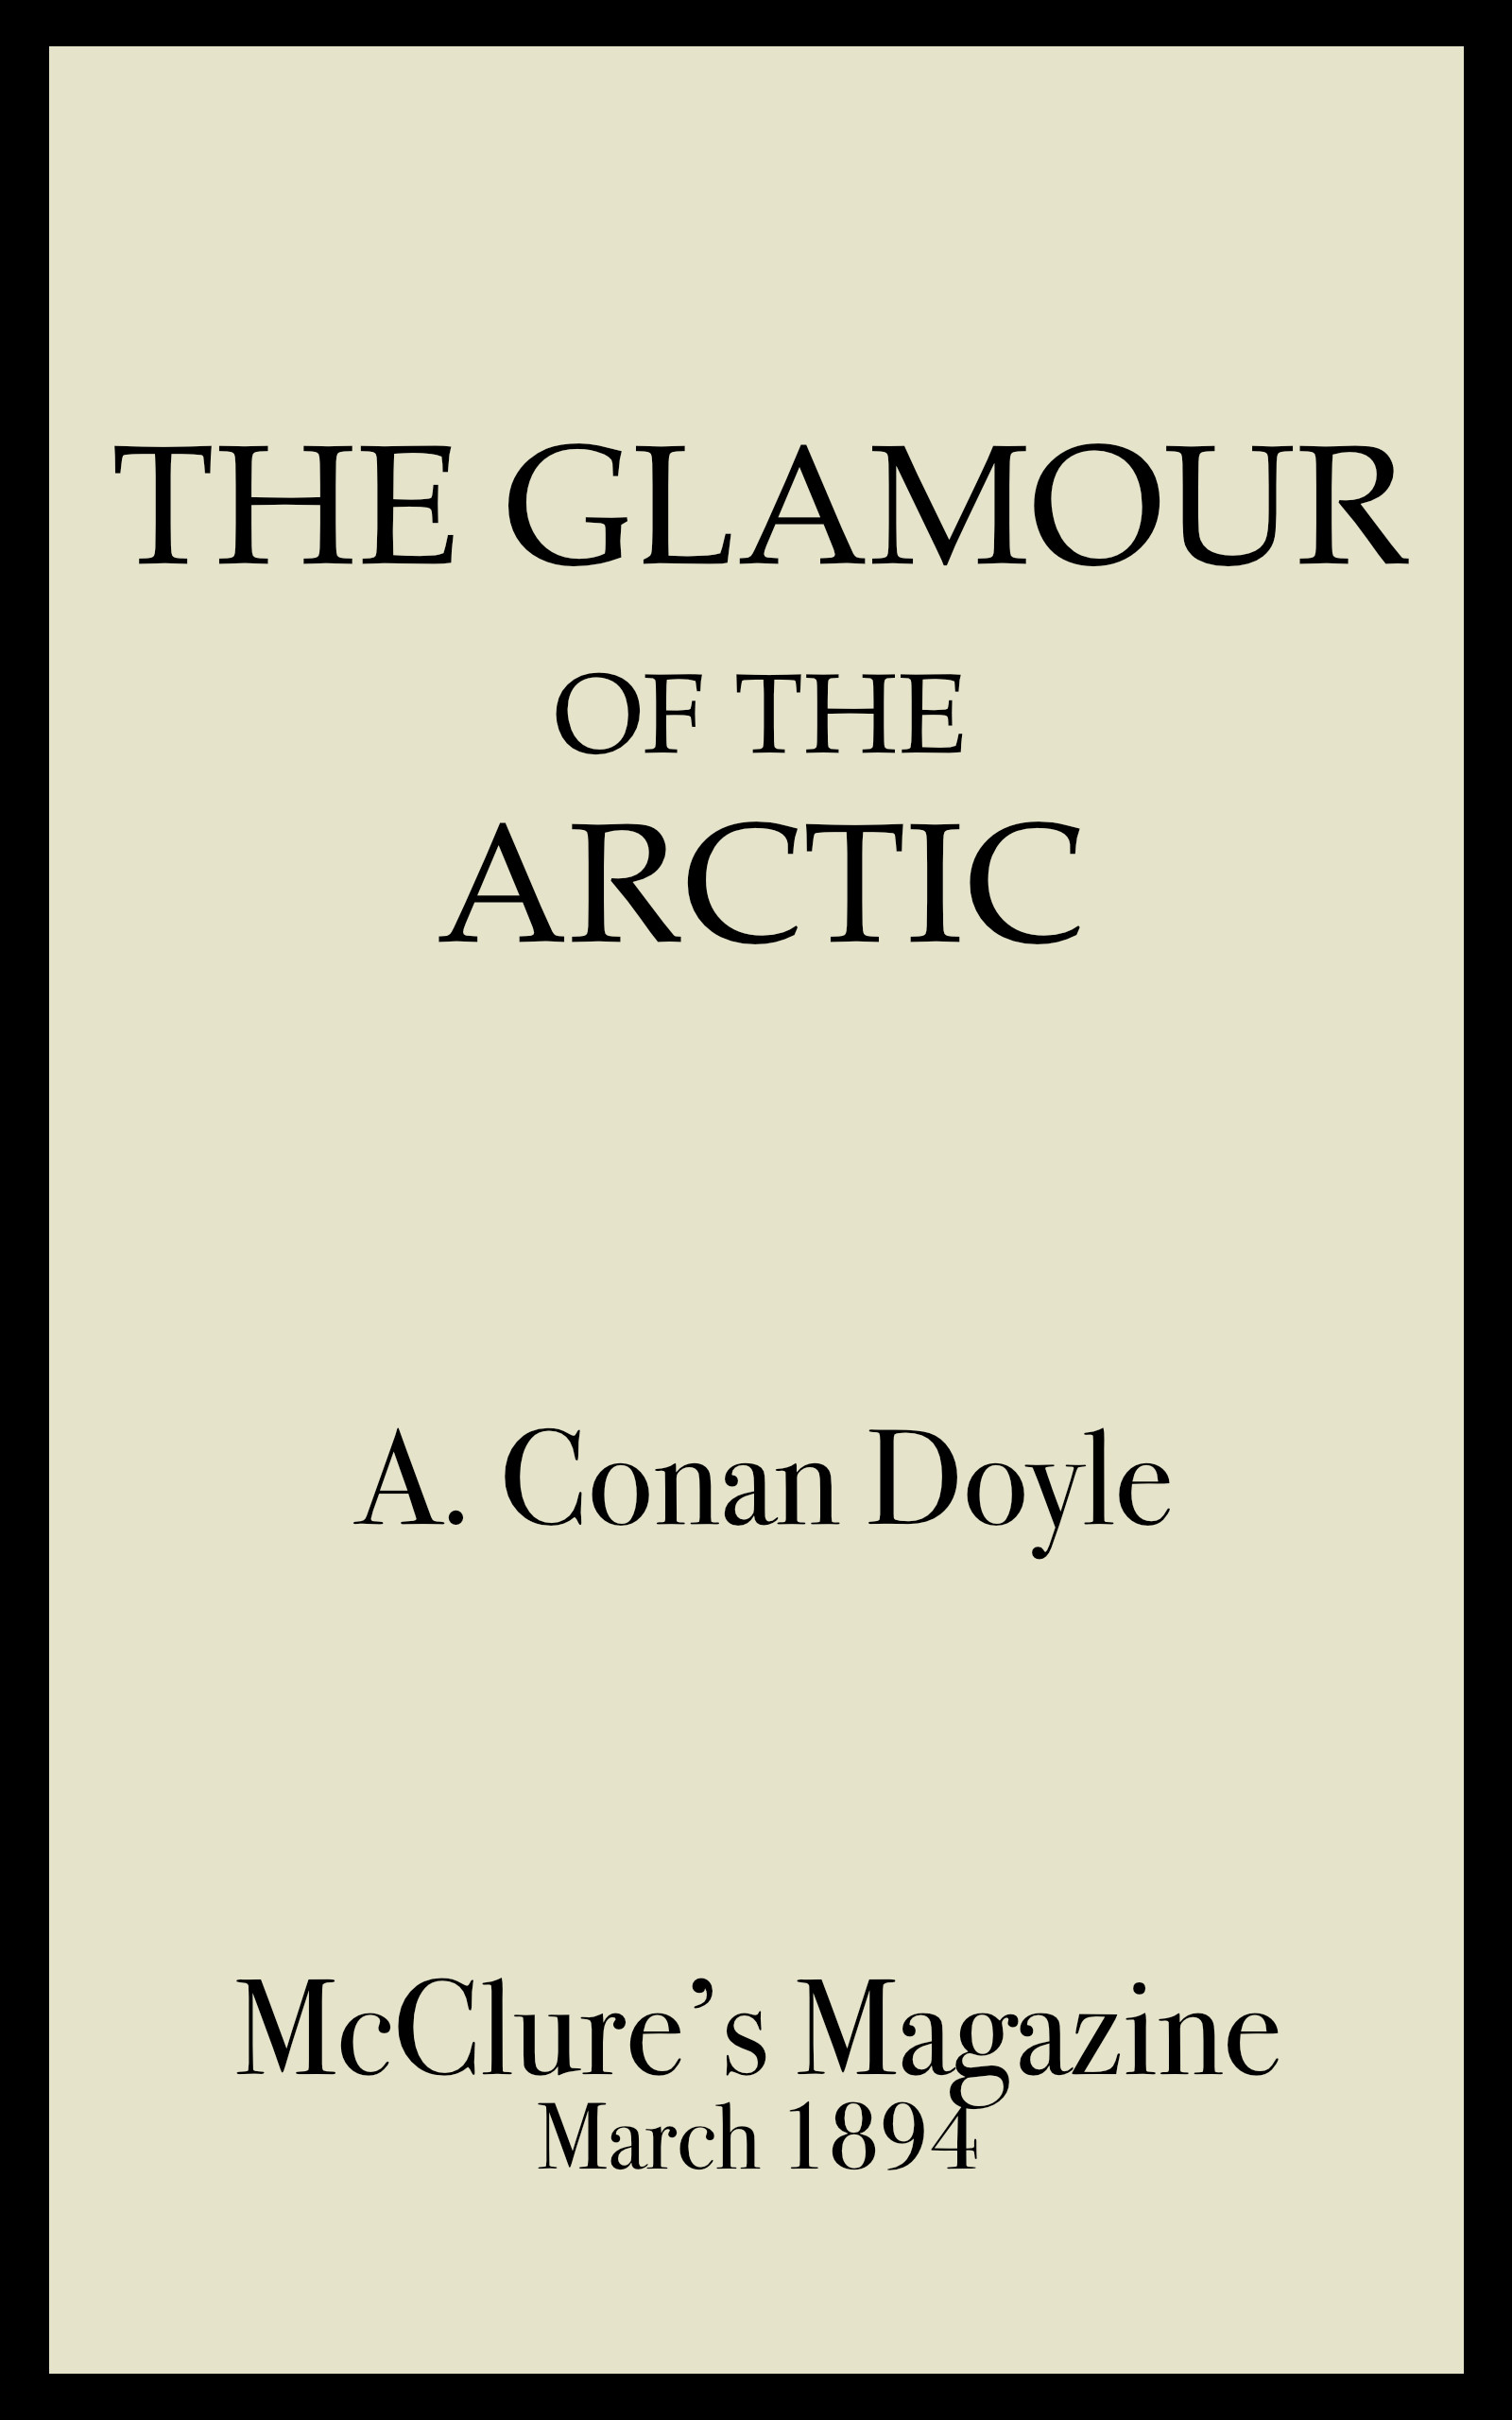 The Glamour of the Arctic